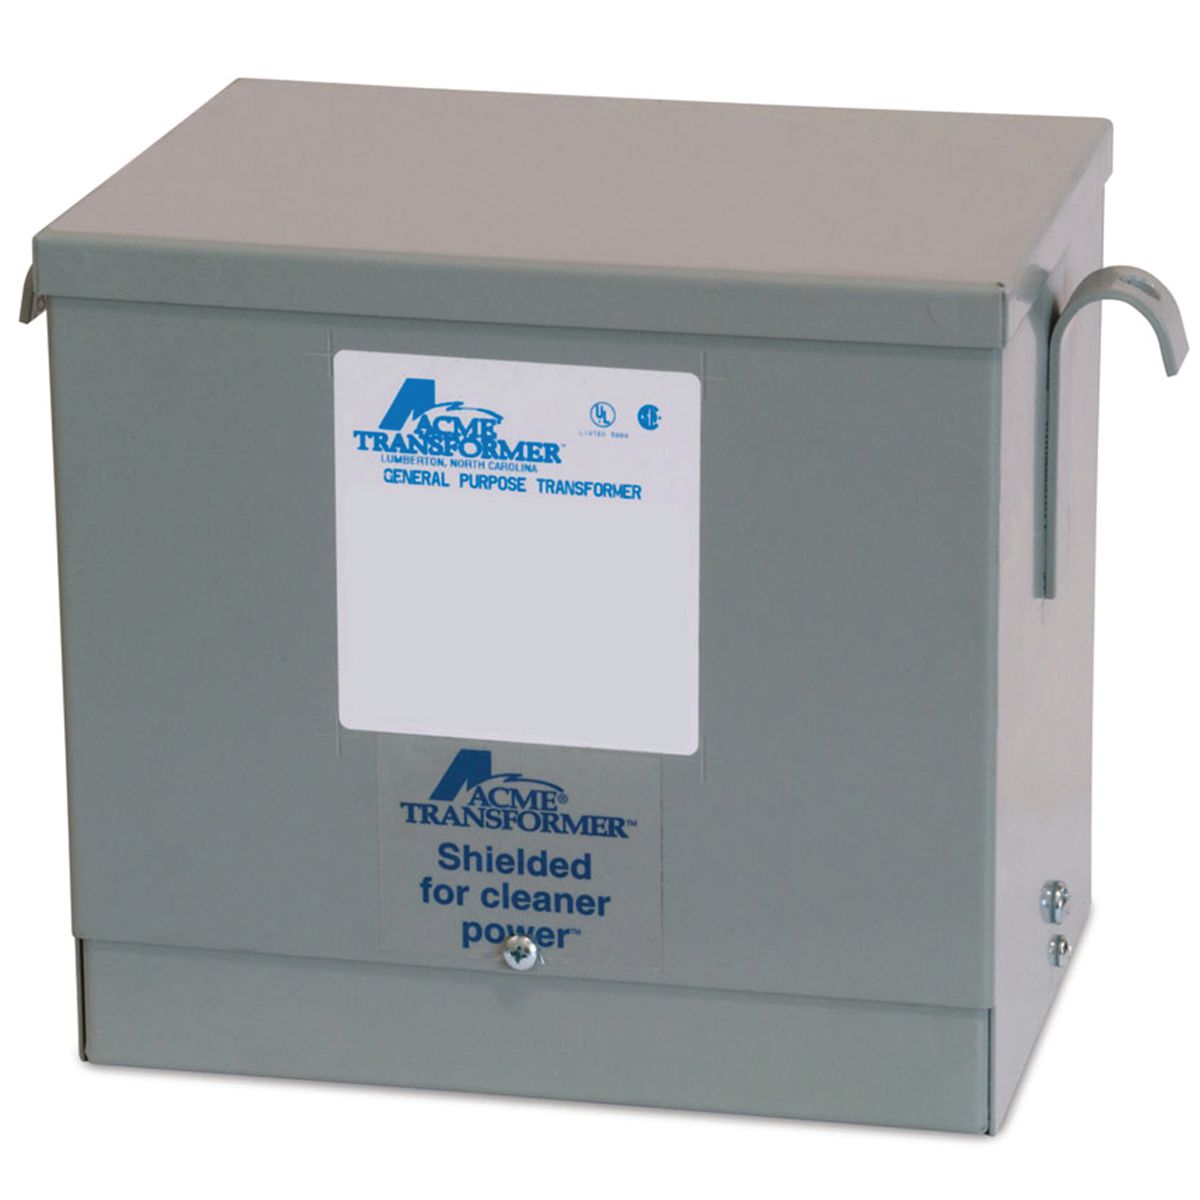 Acme T-1-53004 Distribution Transformer 240x480 in a Box* for sale online 